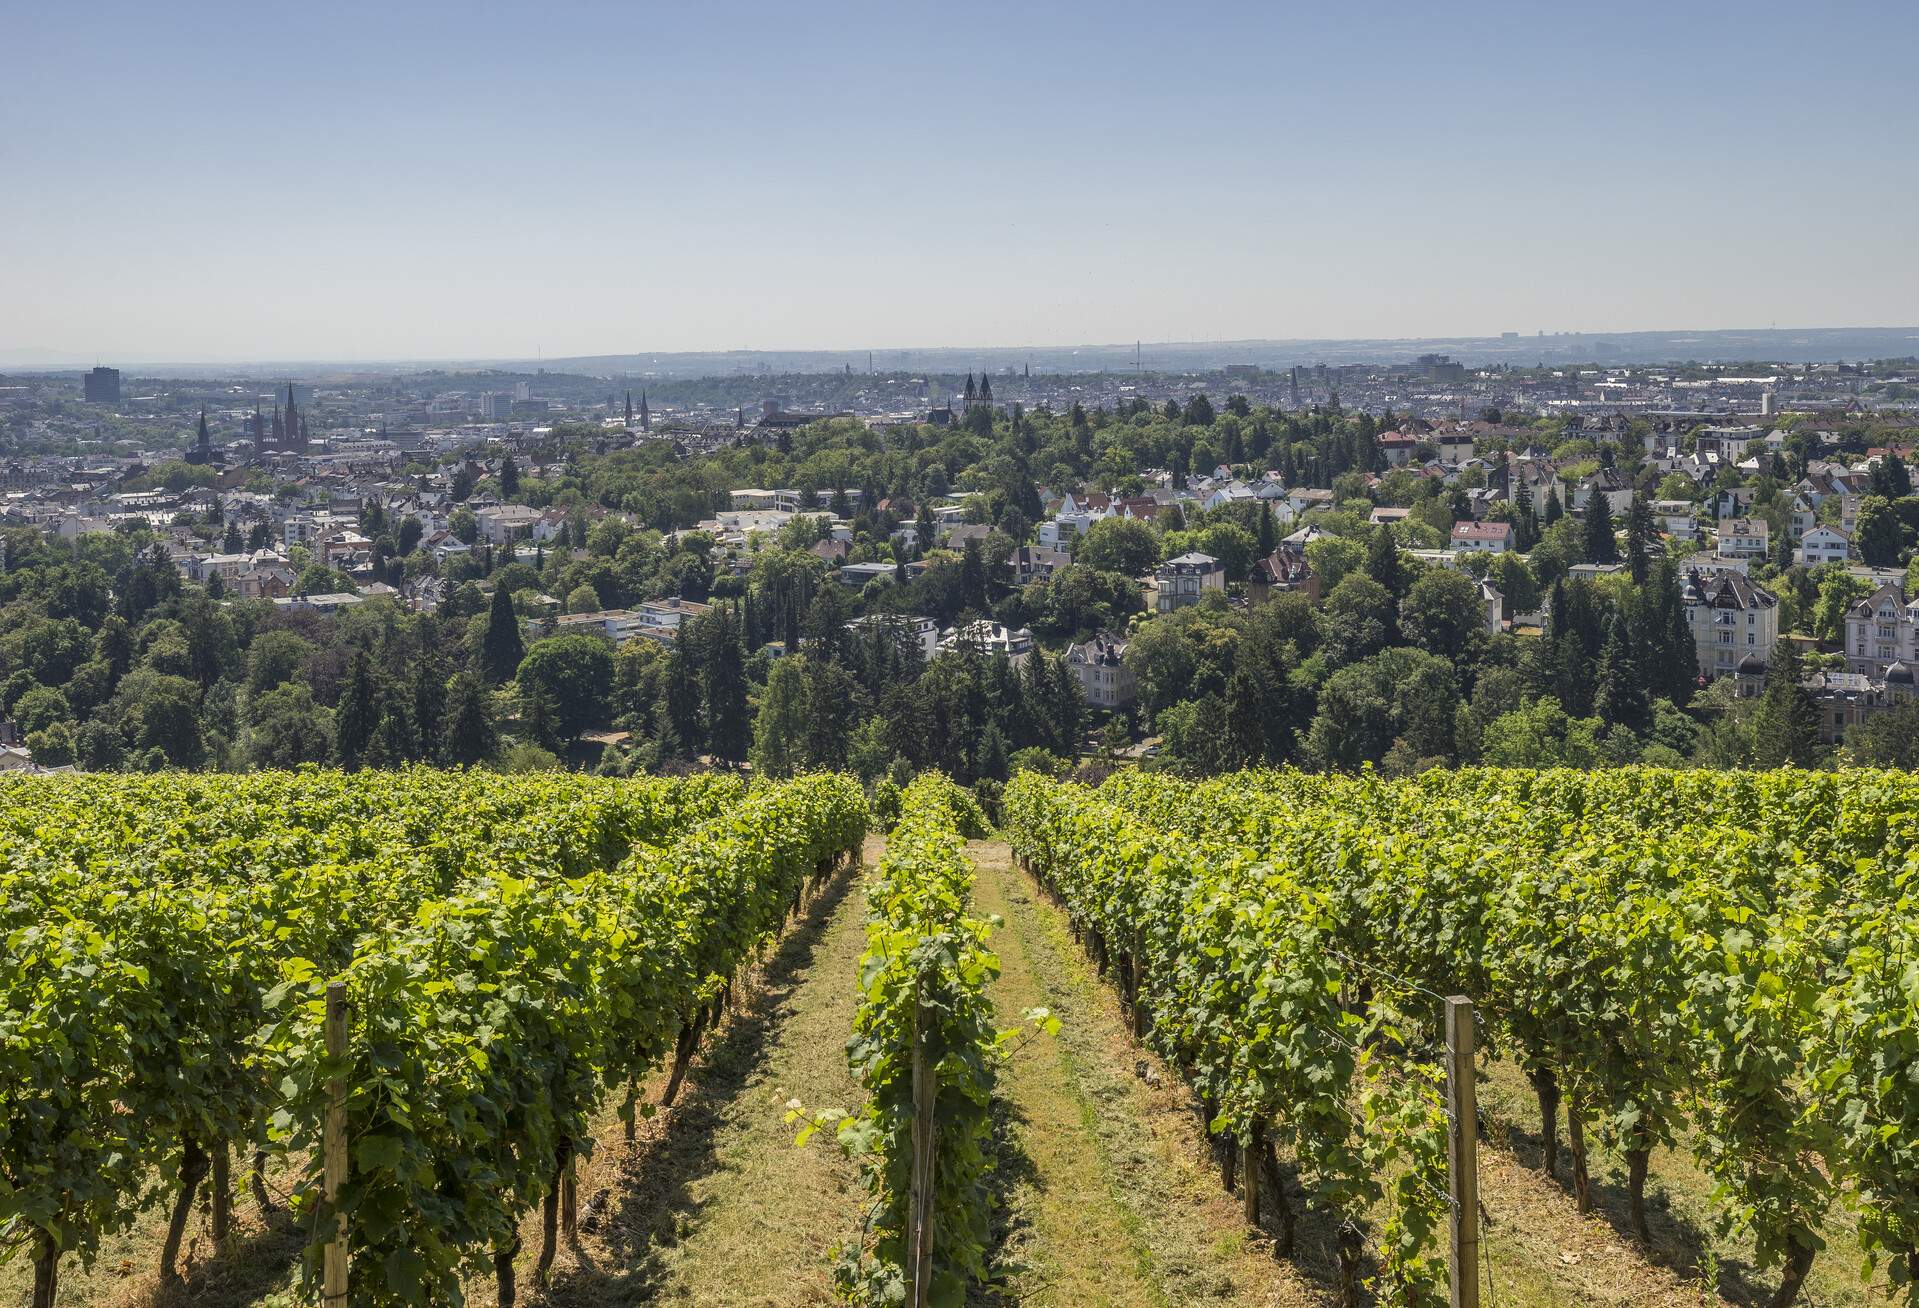 A hillside vineyard with panoramic views of the city below it.